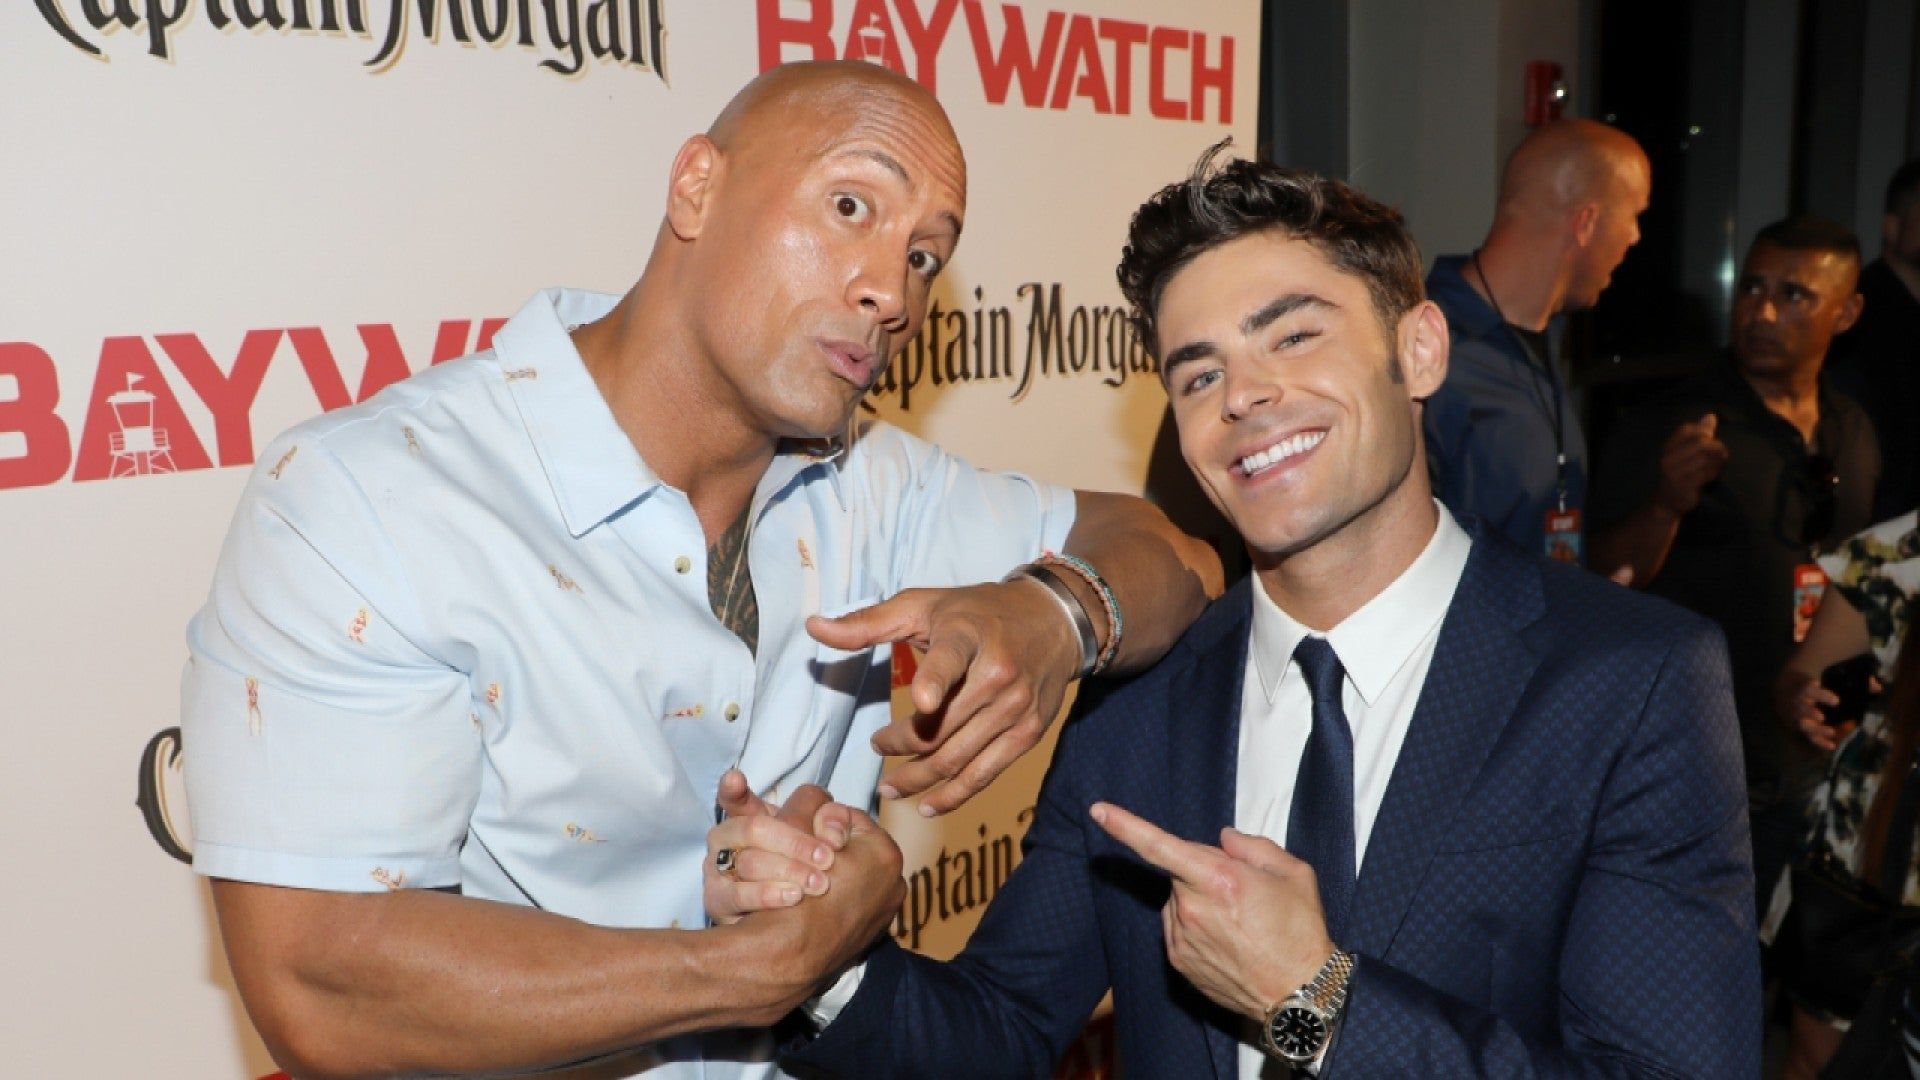 EXCLUSIVE: Dwayne Johnson Reveals What It's Like to Kiss Zac Efron